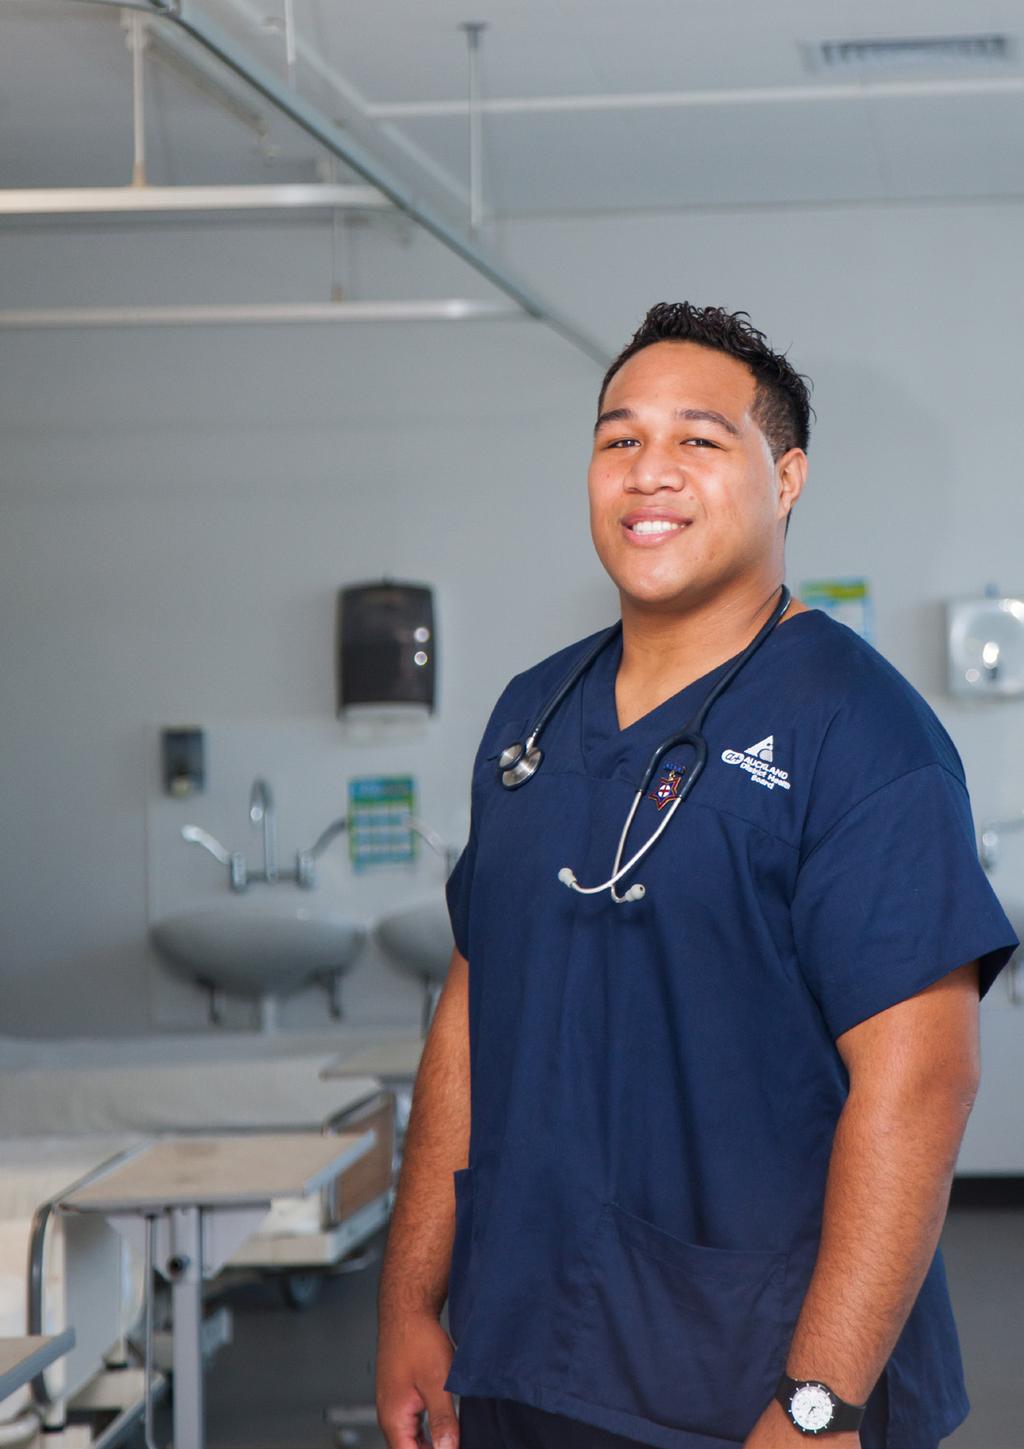 RODNEY PAASI Registered Nurse, Auckland Hospital Auckland District Health Board Bachelor of Health Science (Nursing) I chose to do nursing because I m passionate about caring for people in need and